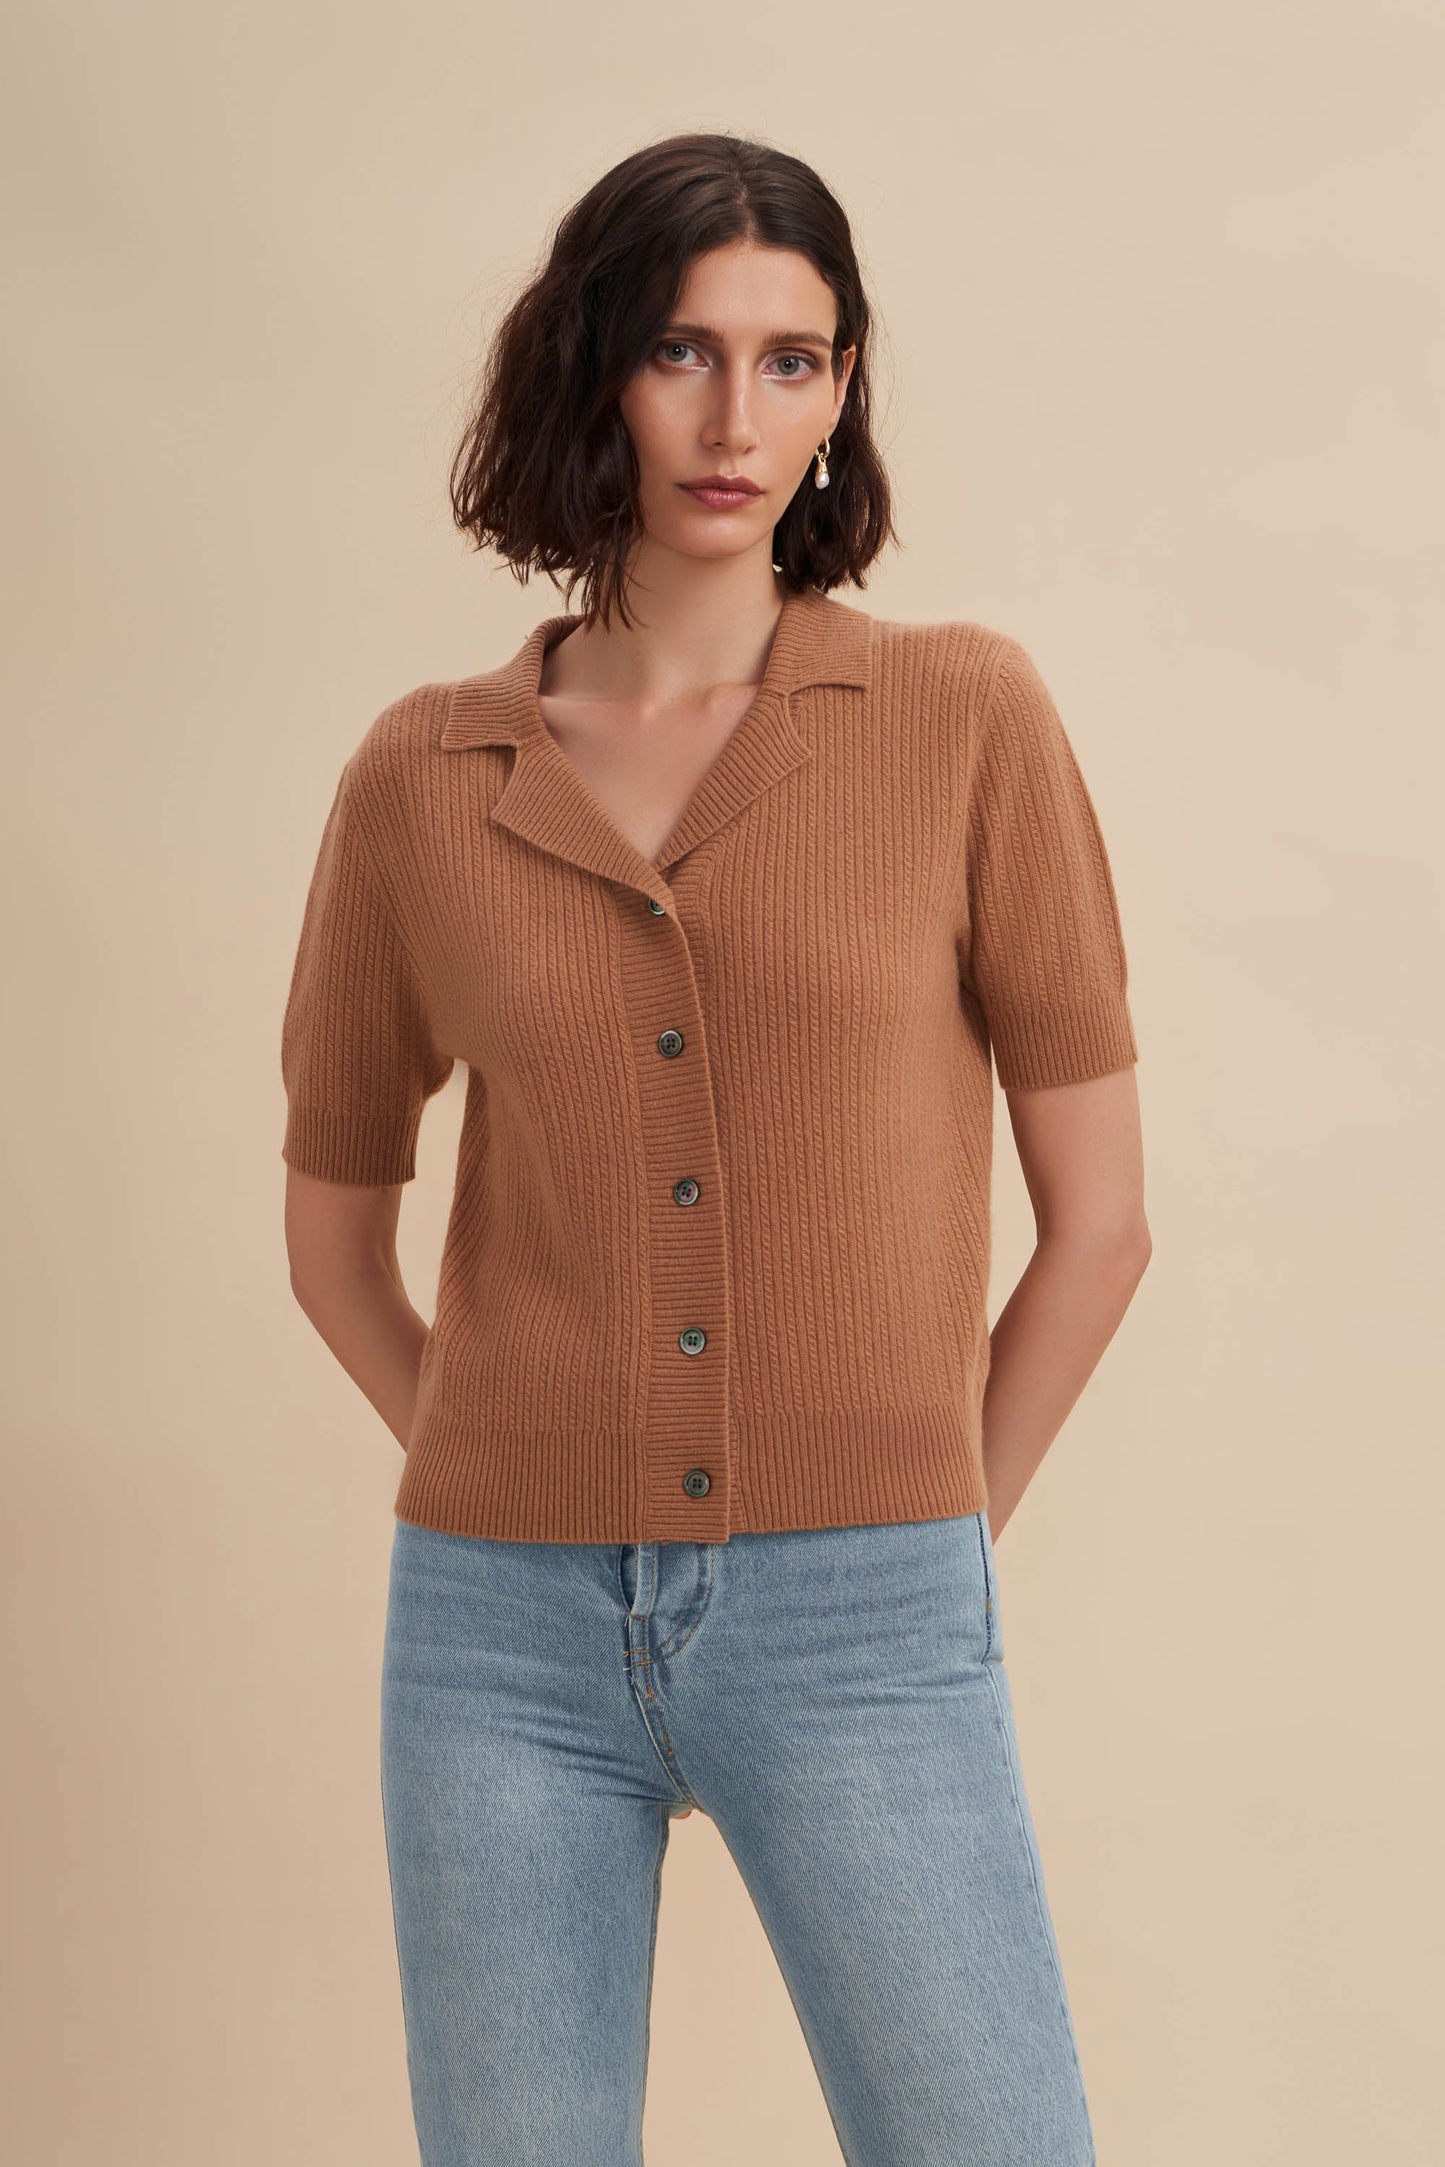 weater with collar, collar sweater, knit polo shirt, polo shirt sweater, collared sweater, camel sweater, camel cashmere sweaters, camel sweater women, camel sweater outfit, cable knit sweater，cable knit sweater womens，short sleeve sweater，short sleeve sweater women's，short sleeve sweater cardigan，short sleeve cardigan sweater ，short sleeve cashmere sweater  Edit alt text